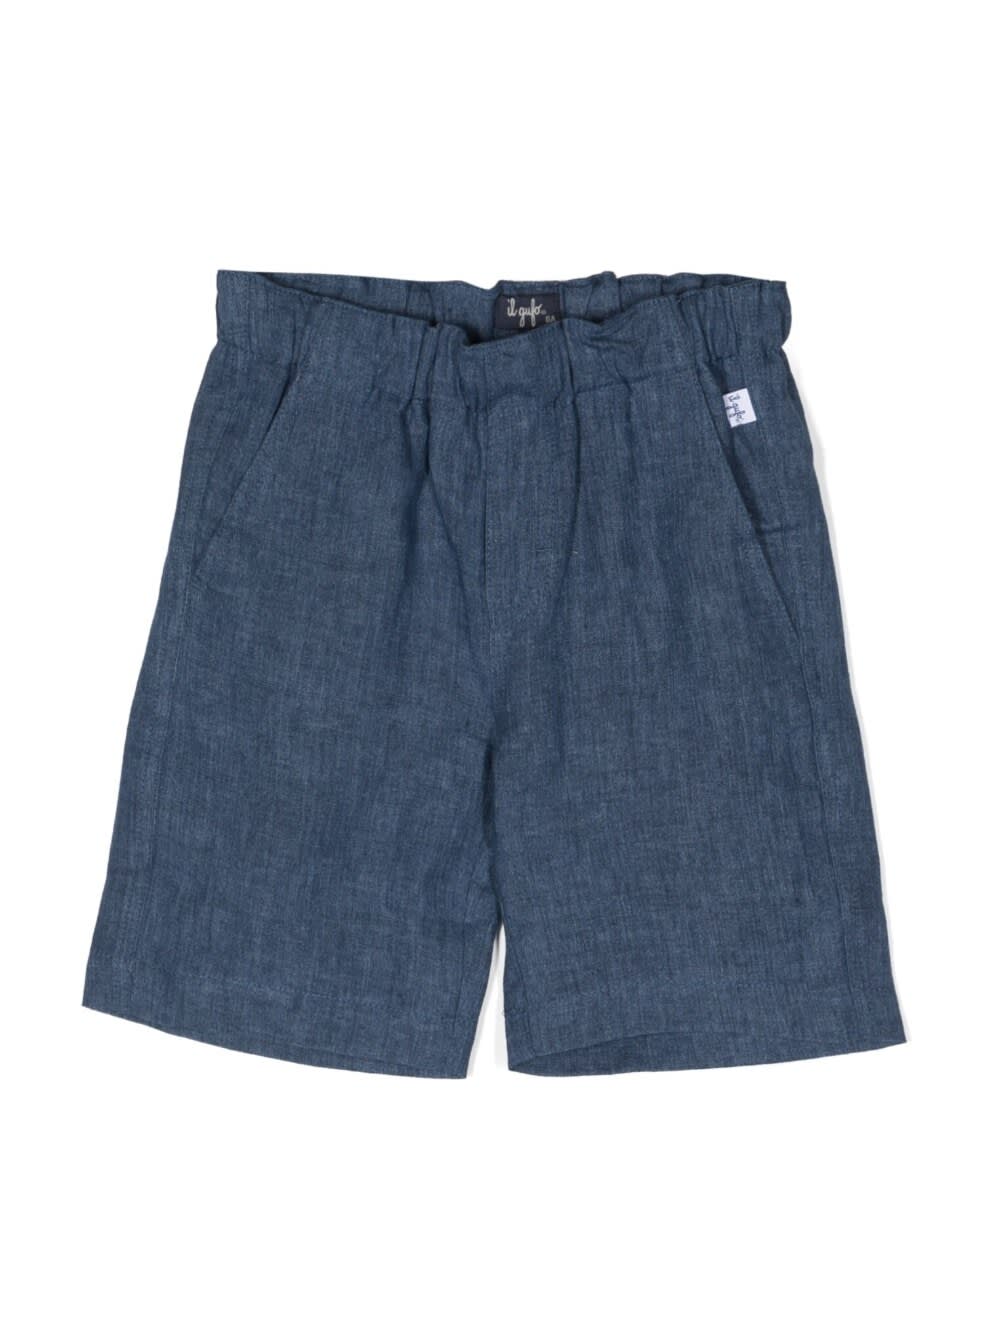 IL GUFO BLUE BERMUDA SHORTS WITH ELASTIC WAISTBAND AND LOGO PATCH IN LINEN BOY